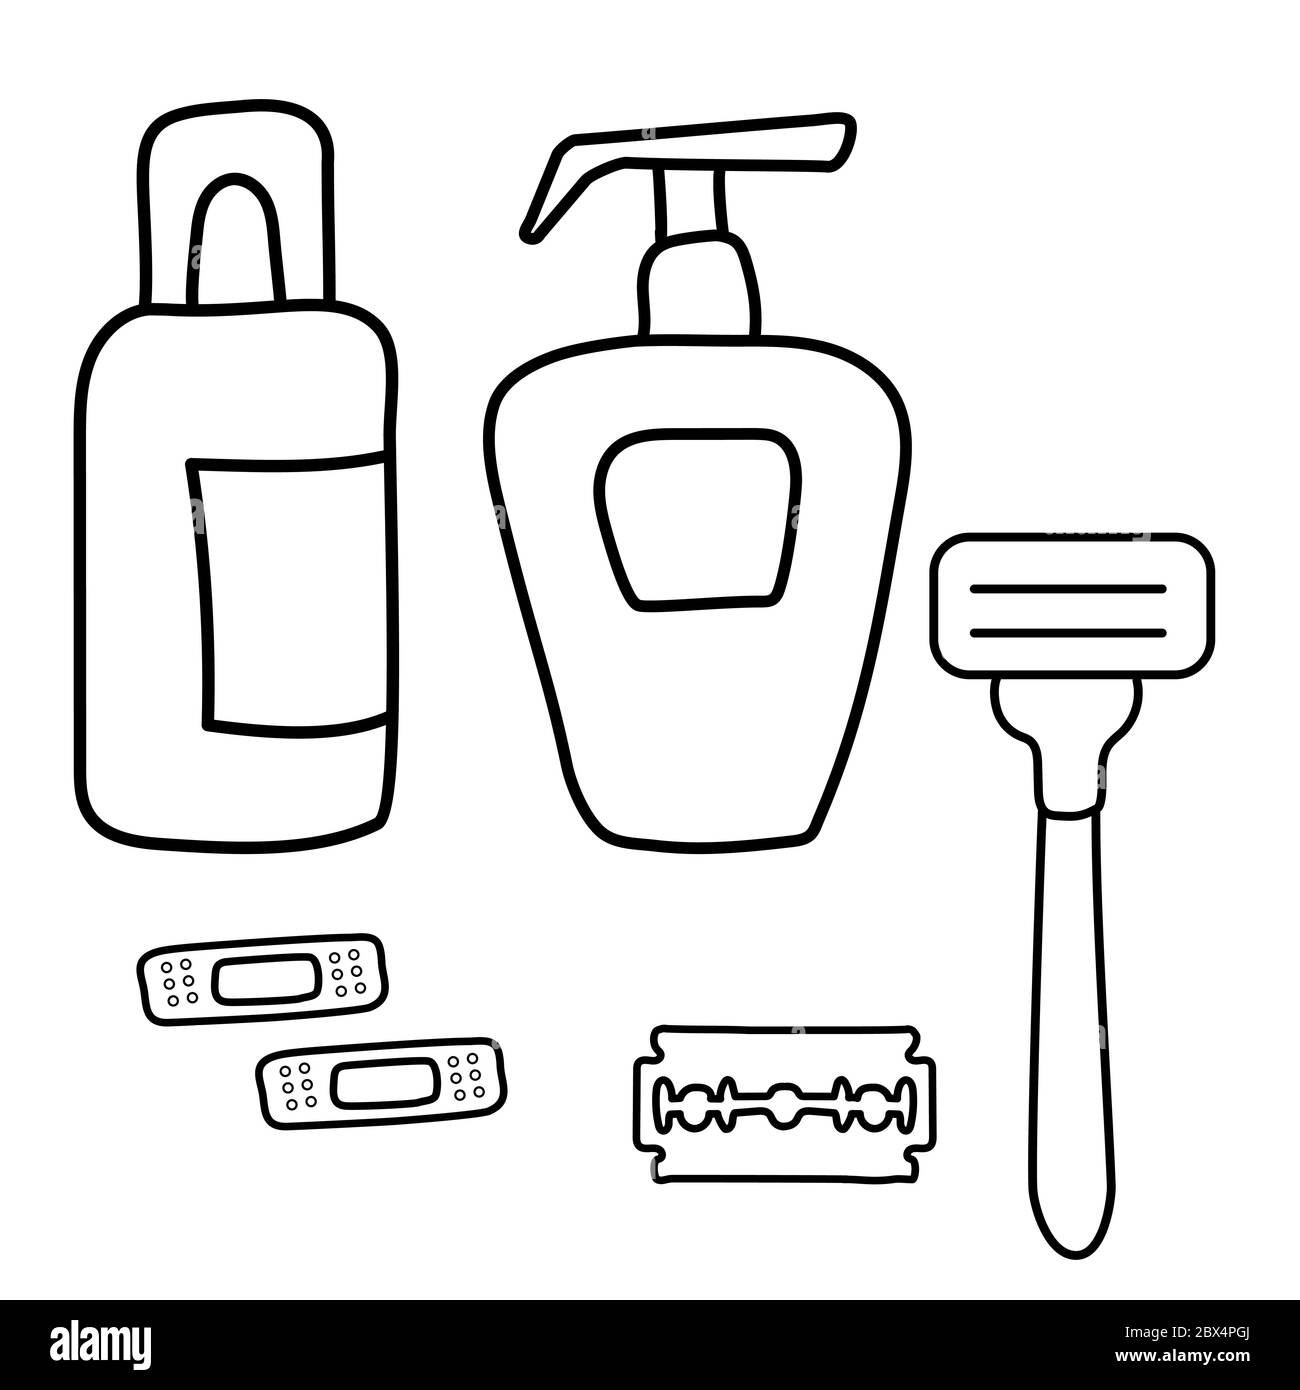 Beauty and fashion set. Contour drawings of cosmetics for the body. Shaving and hair removal. Cream and tonic, razor and blade and band-aid from cuts Stock Vector